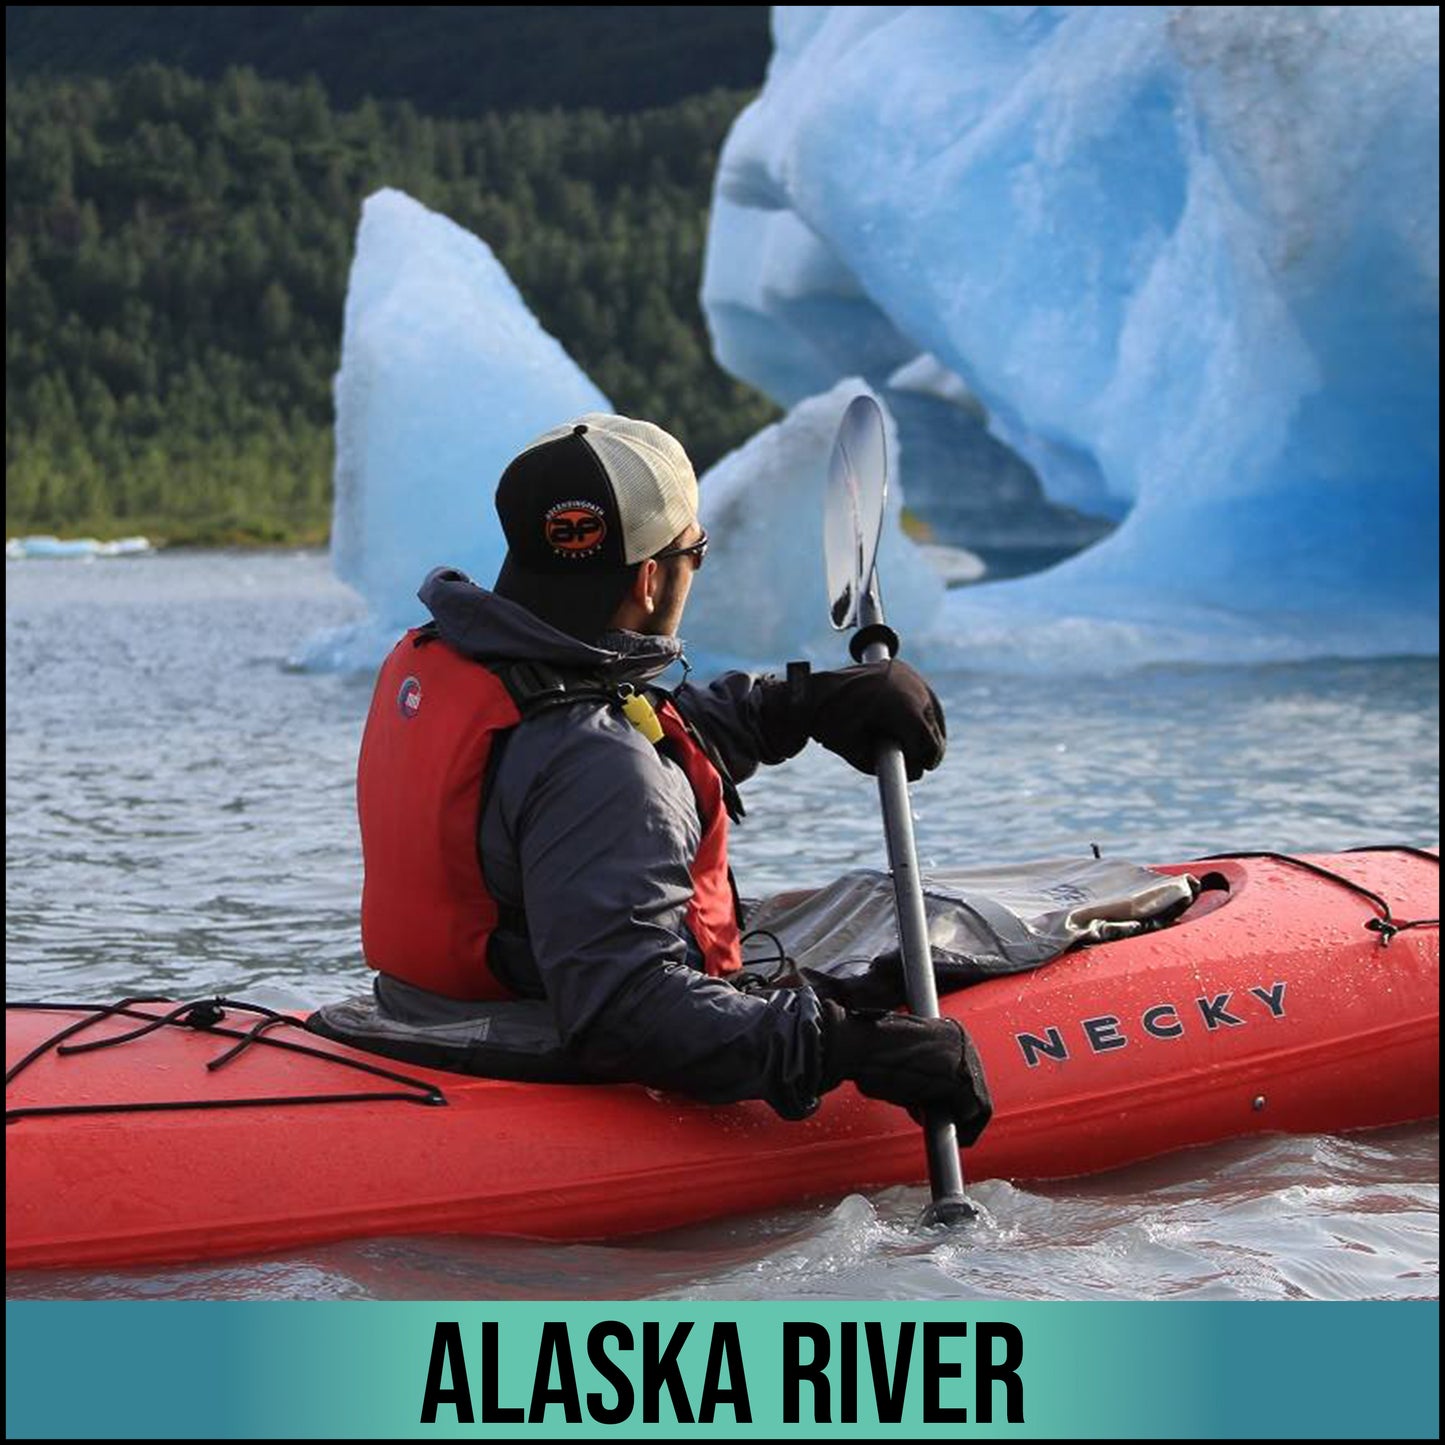 A fingerless glove or a mitten, your choice. The design of the Alaska River Flip Mitt is very effective at keeping your hands warm while allowing for ultimate dexterity.